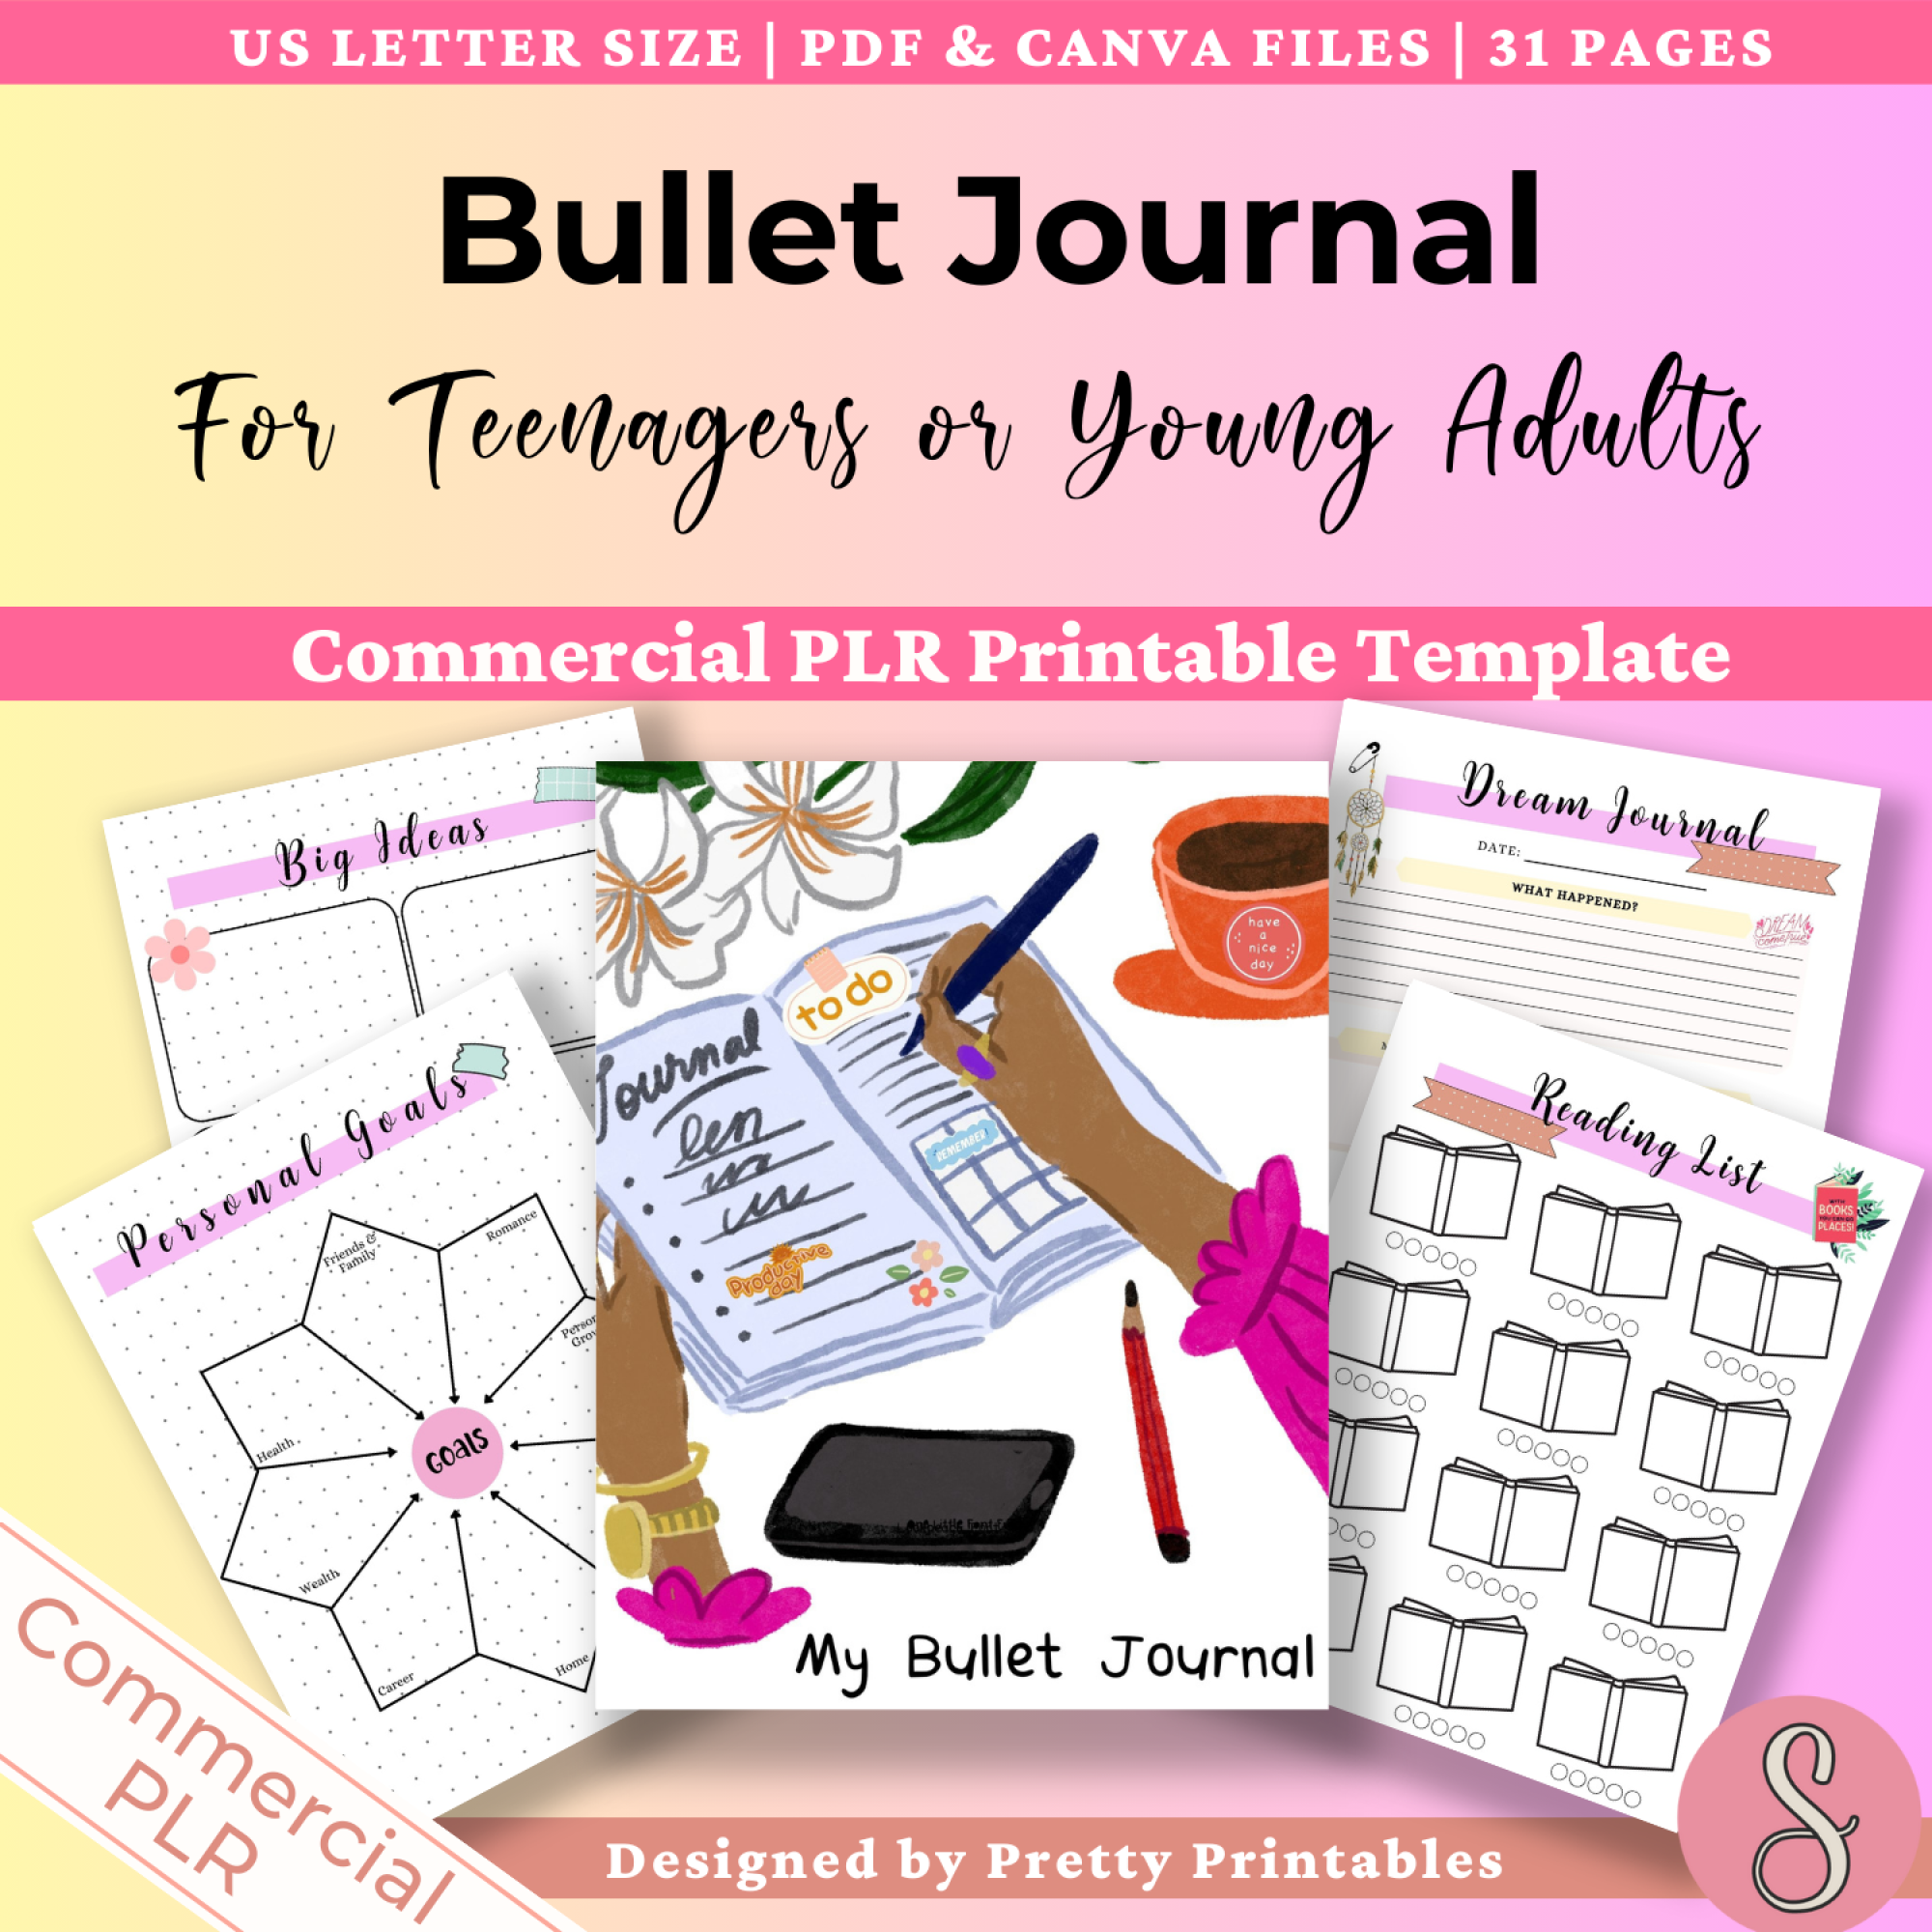 Bullet Journal for Teens or Young Adults